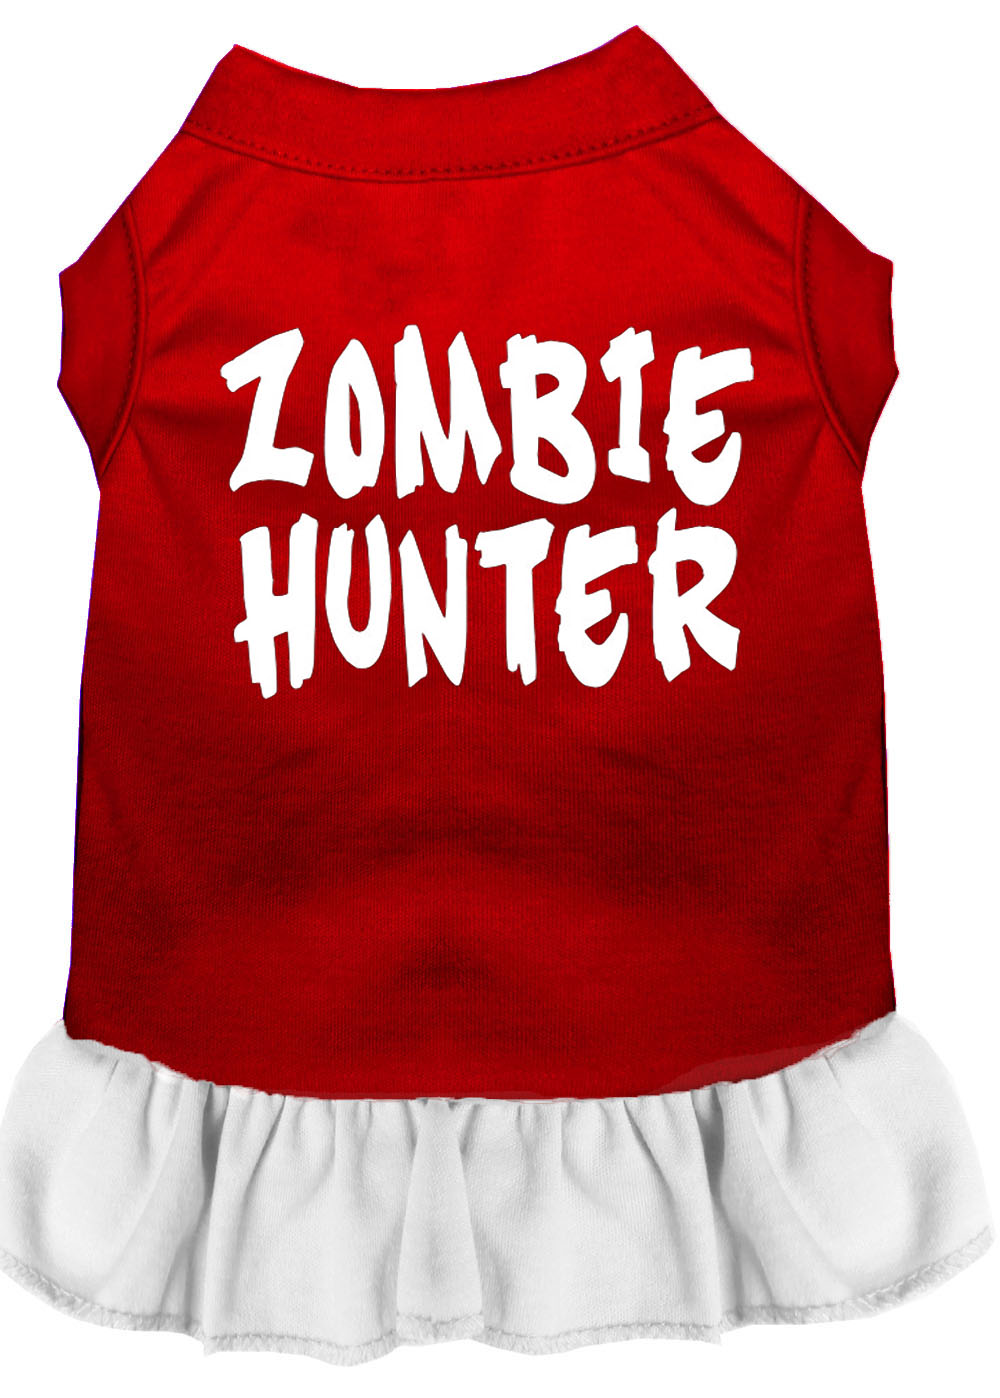 Zombie Hunter Screen Print Dress Red with White XL